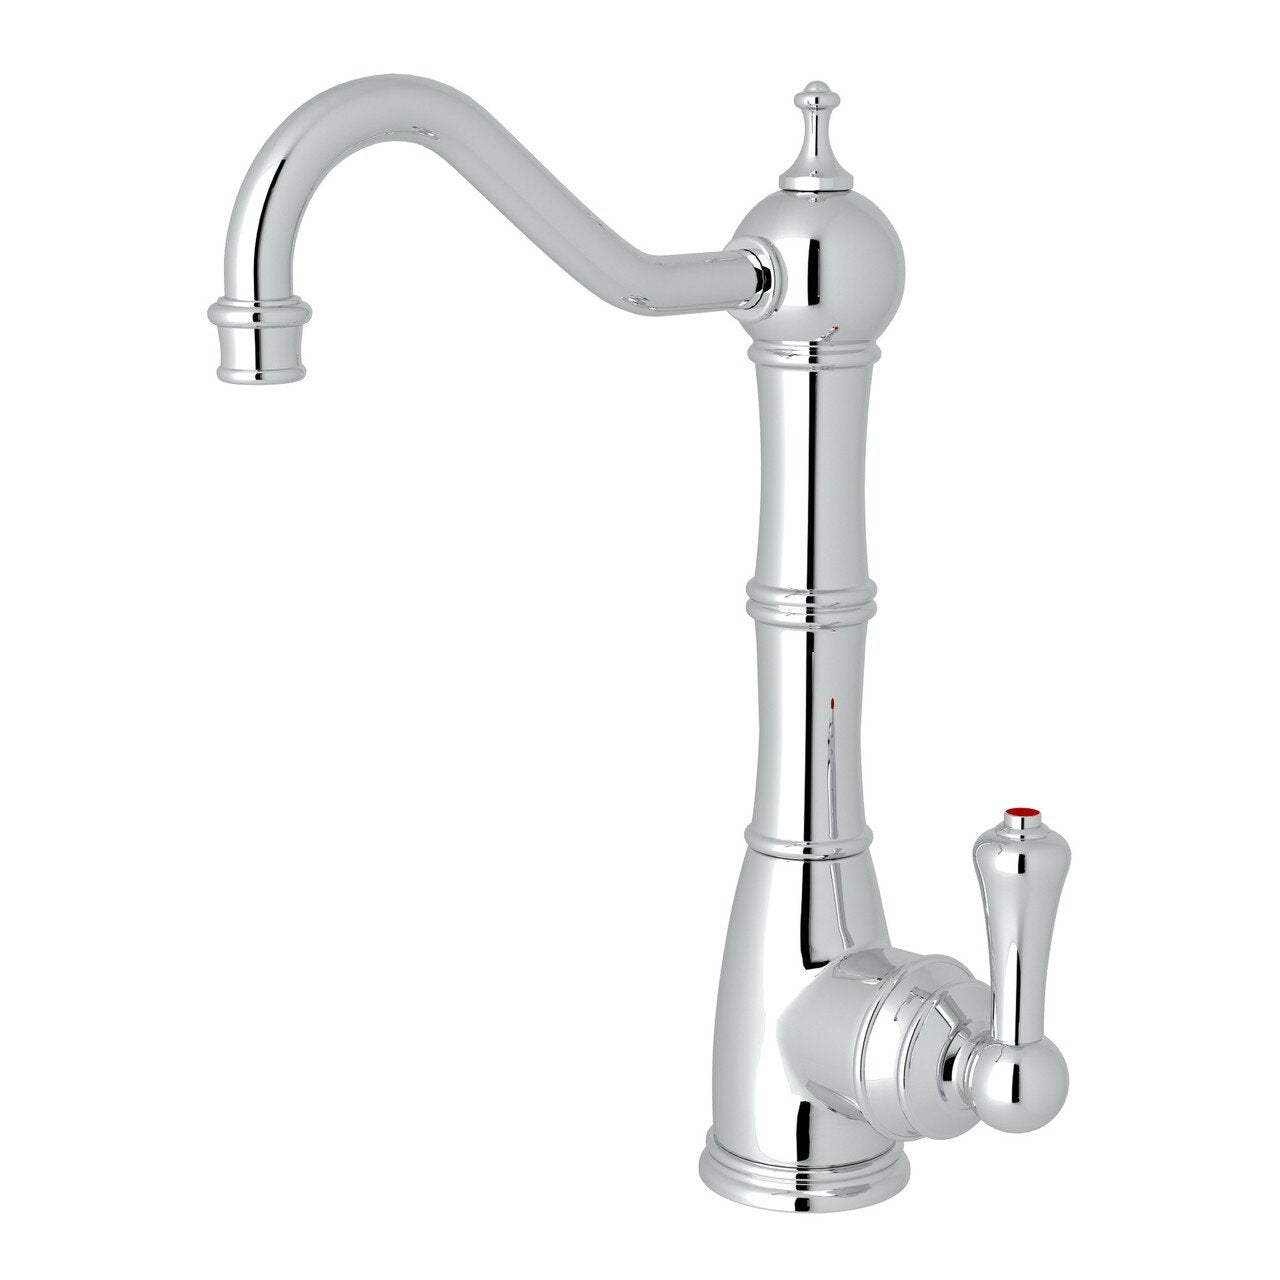 Perrin & Rowe Edwardian Column Spout Hot Water Faucet - BNGBath